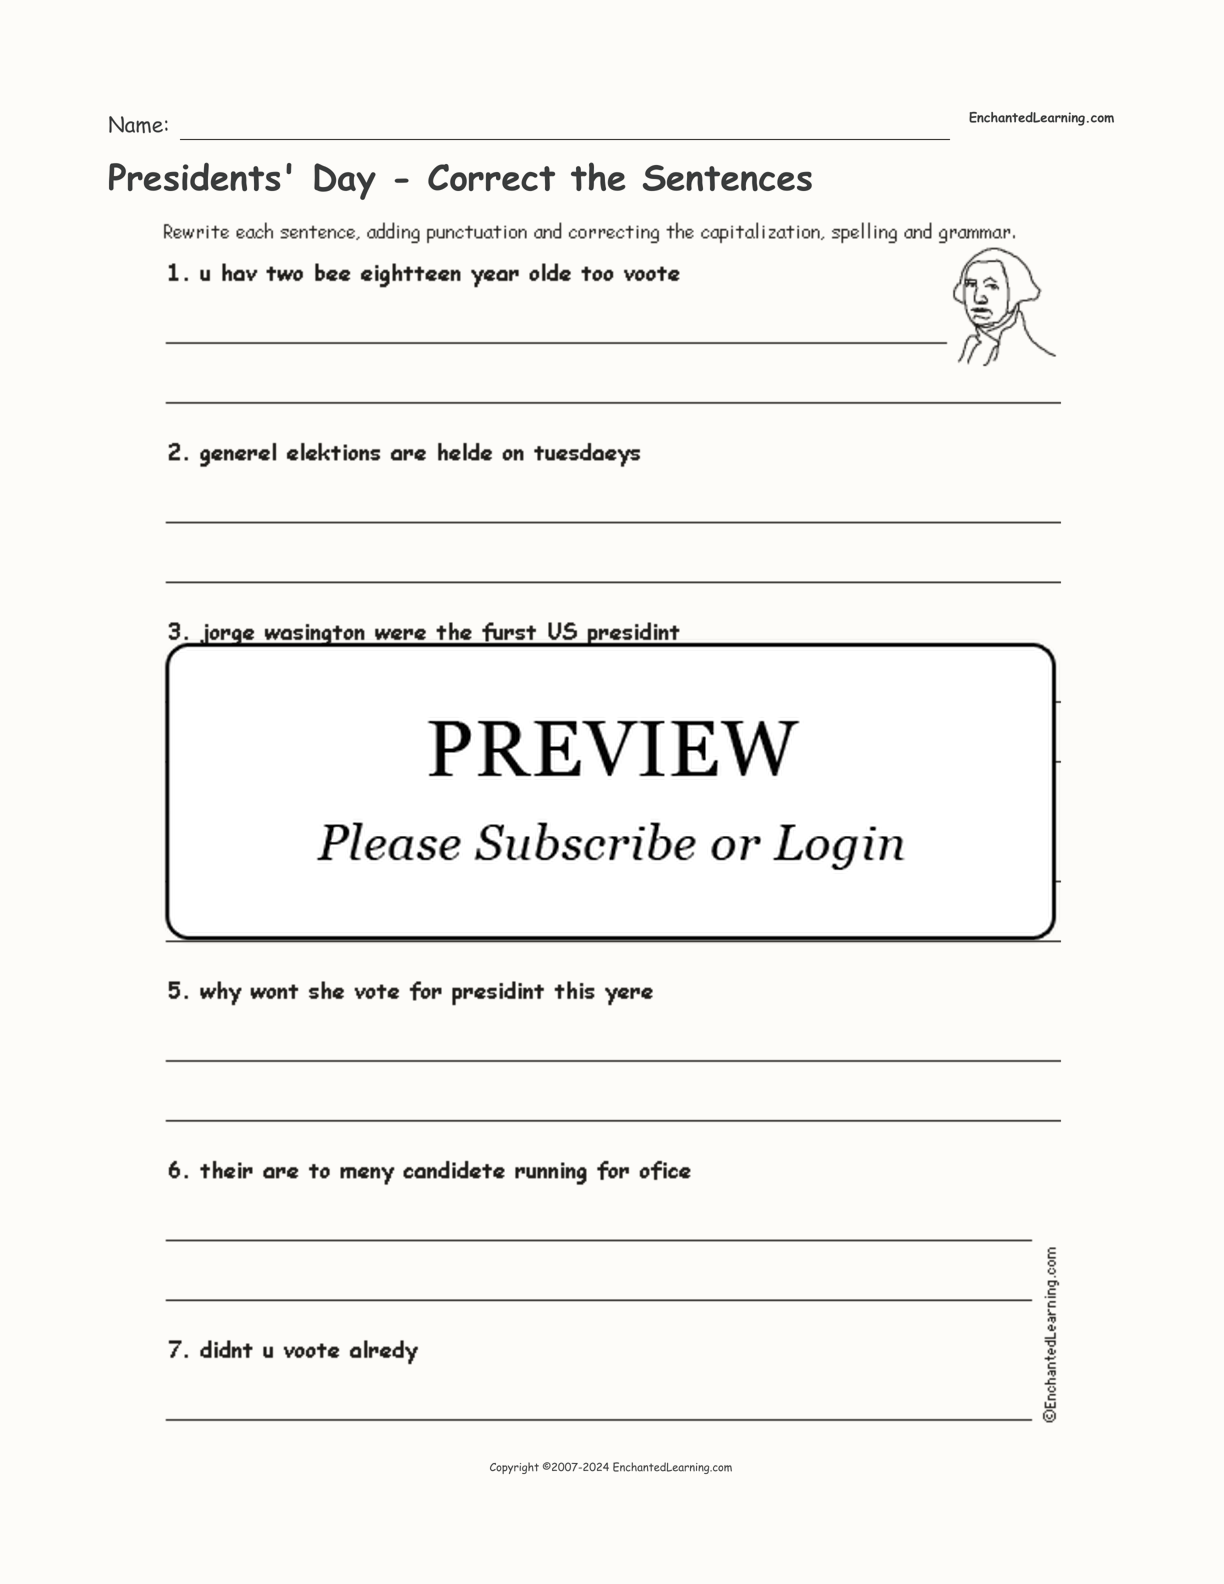 Presidents' Day - Correct the Sentences interactive worksheet page 1